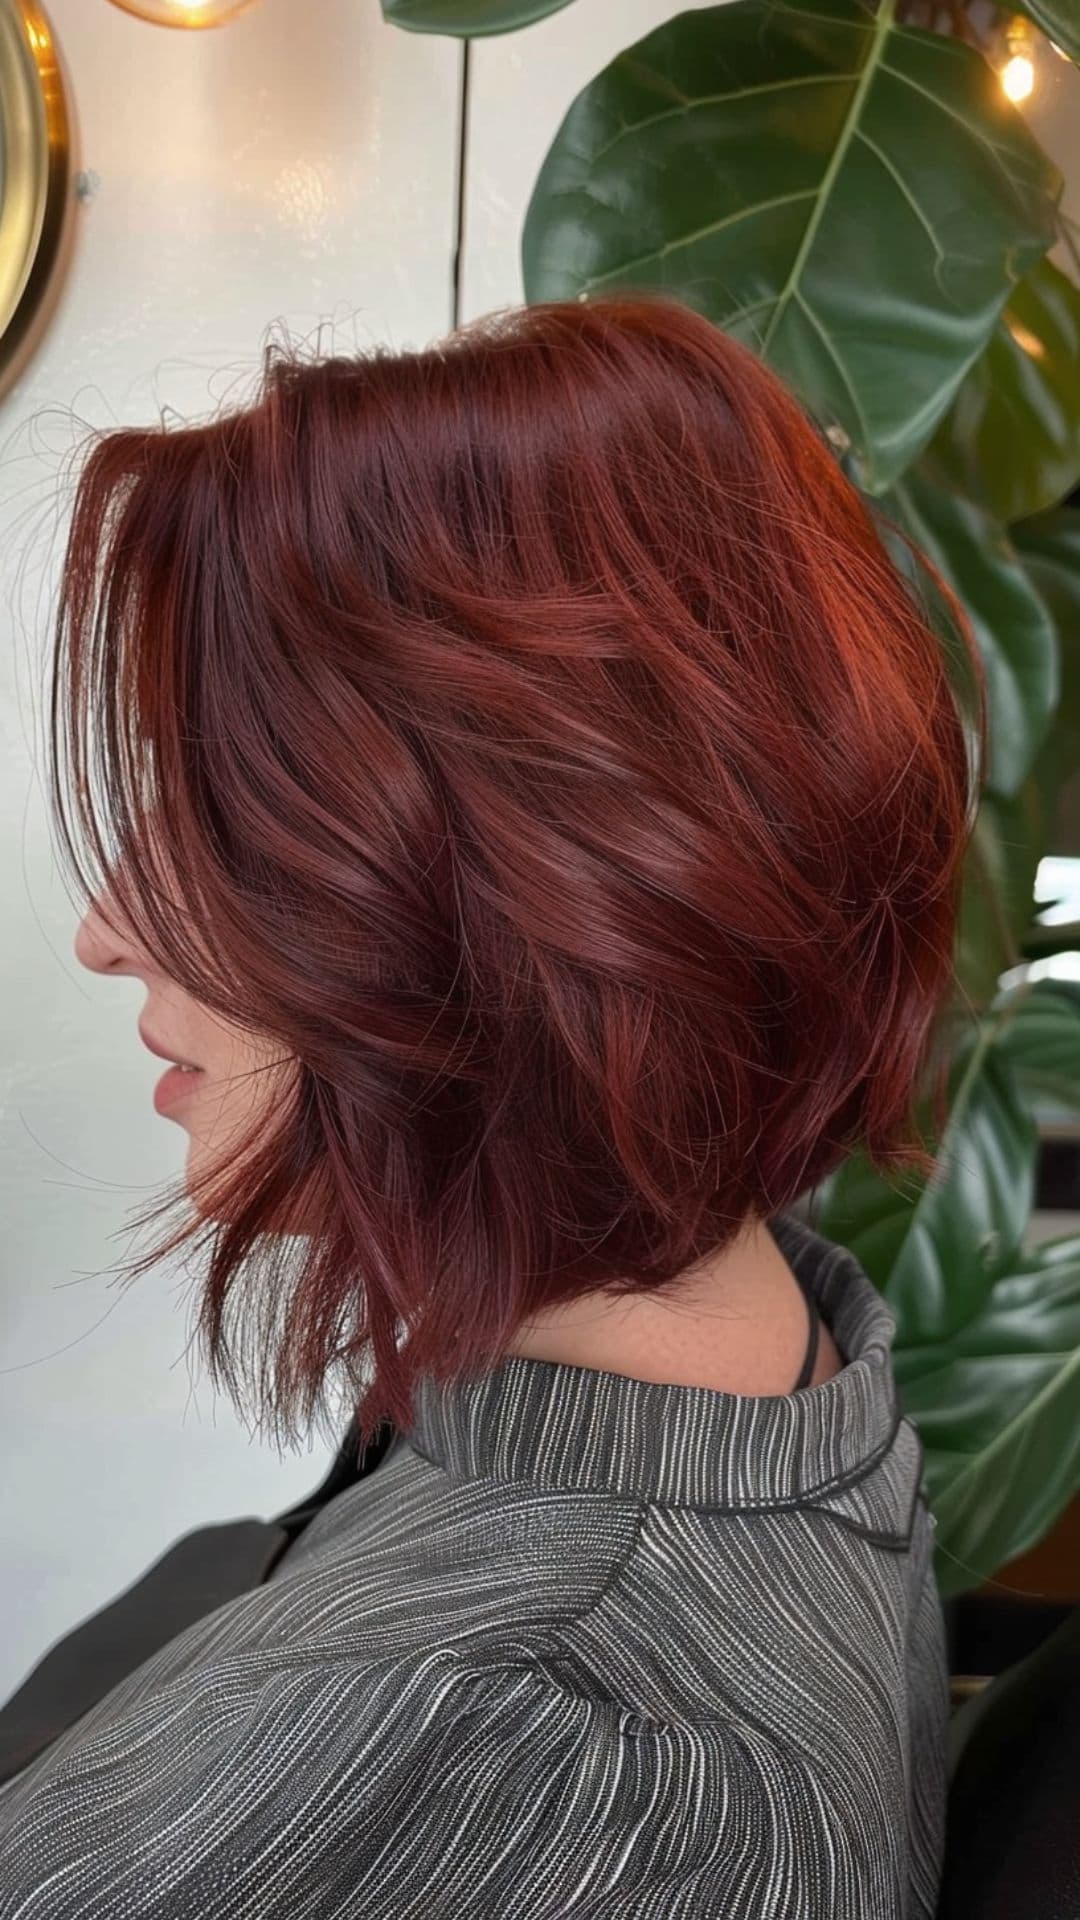 A woman modelling a dark cherry hair color.